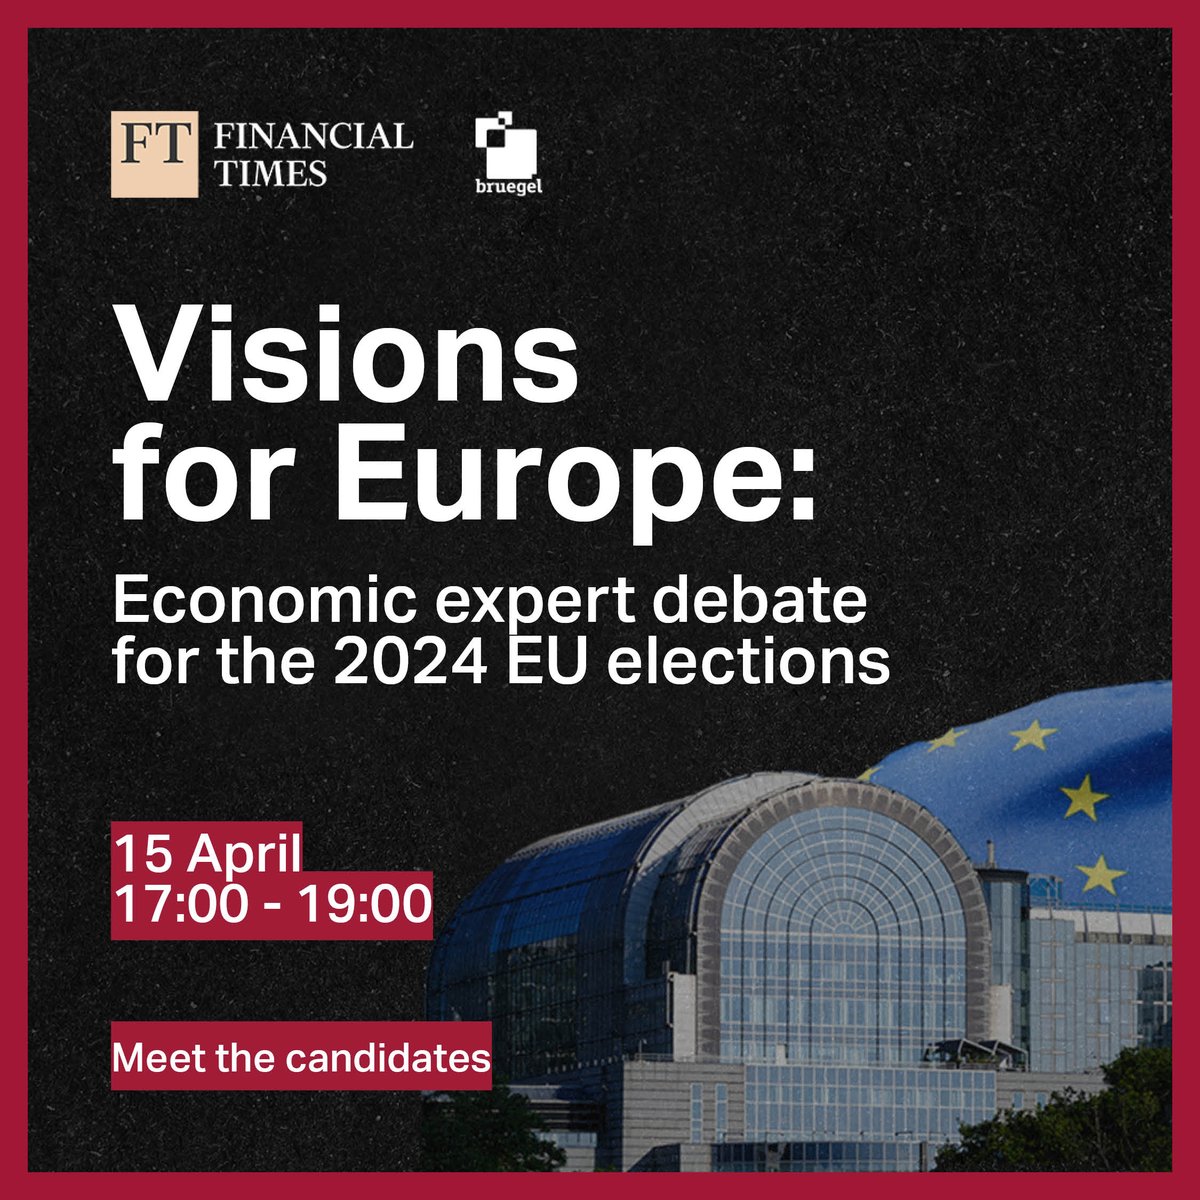 📢Bruegel, partnering with @FT, will host a European election debate among economic experts from the European political parties next Monday at Sparks Meeting

But who are the party experts who will go head-to-head to give us their #Vision4EU? Read this thread to find out! 🧵